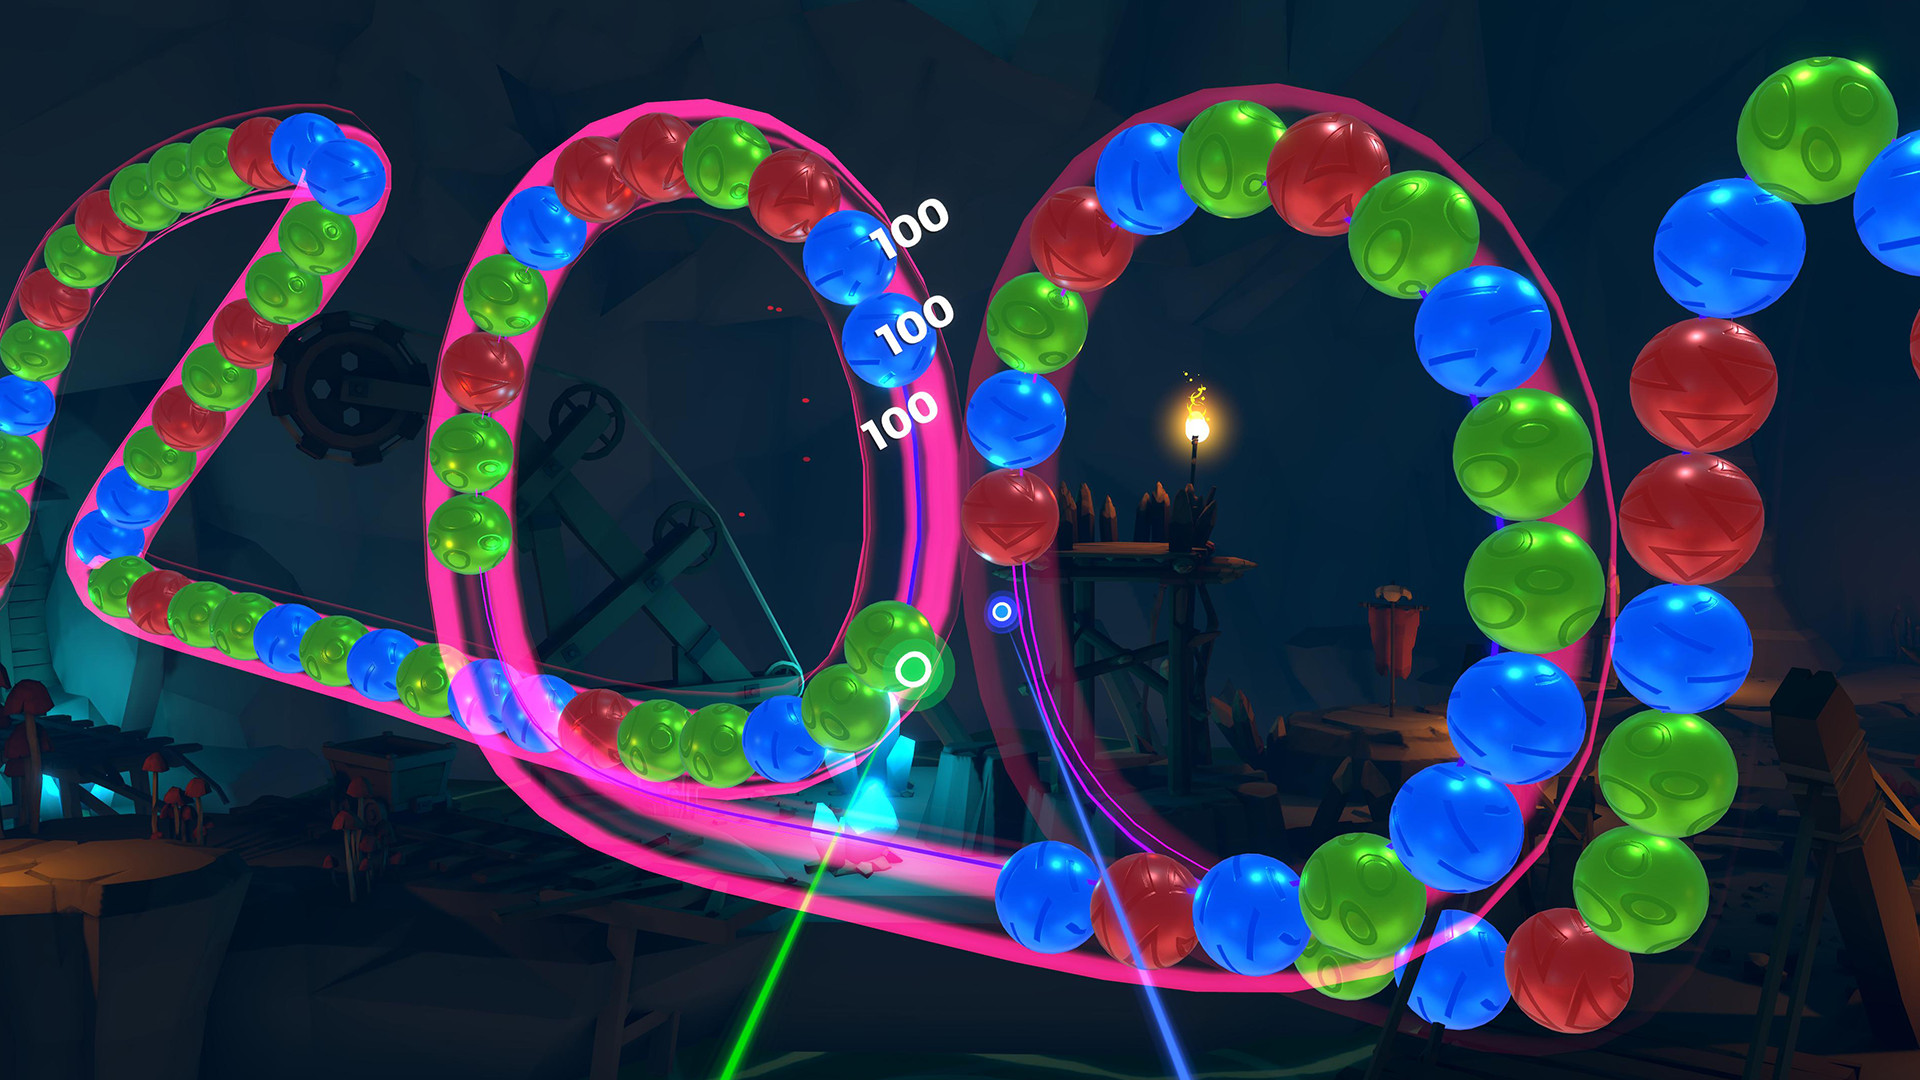 Zooma VR Free Download